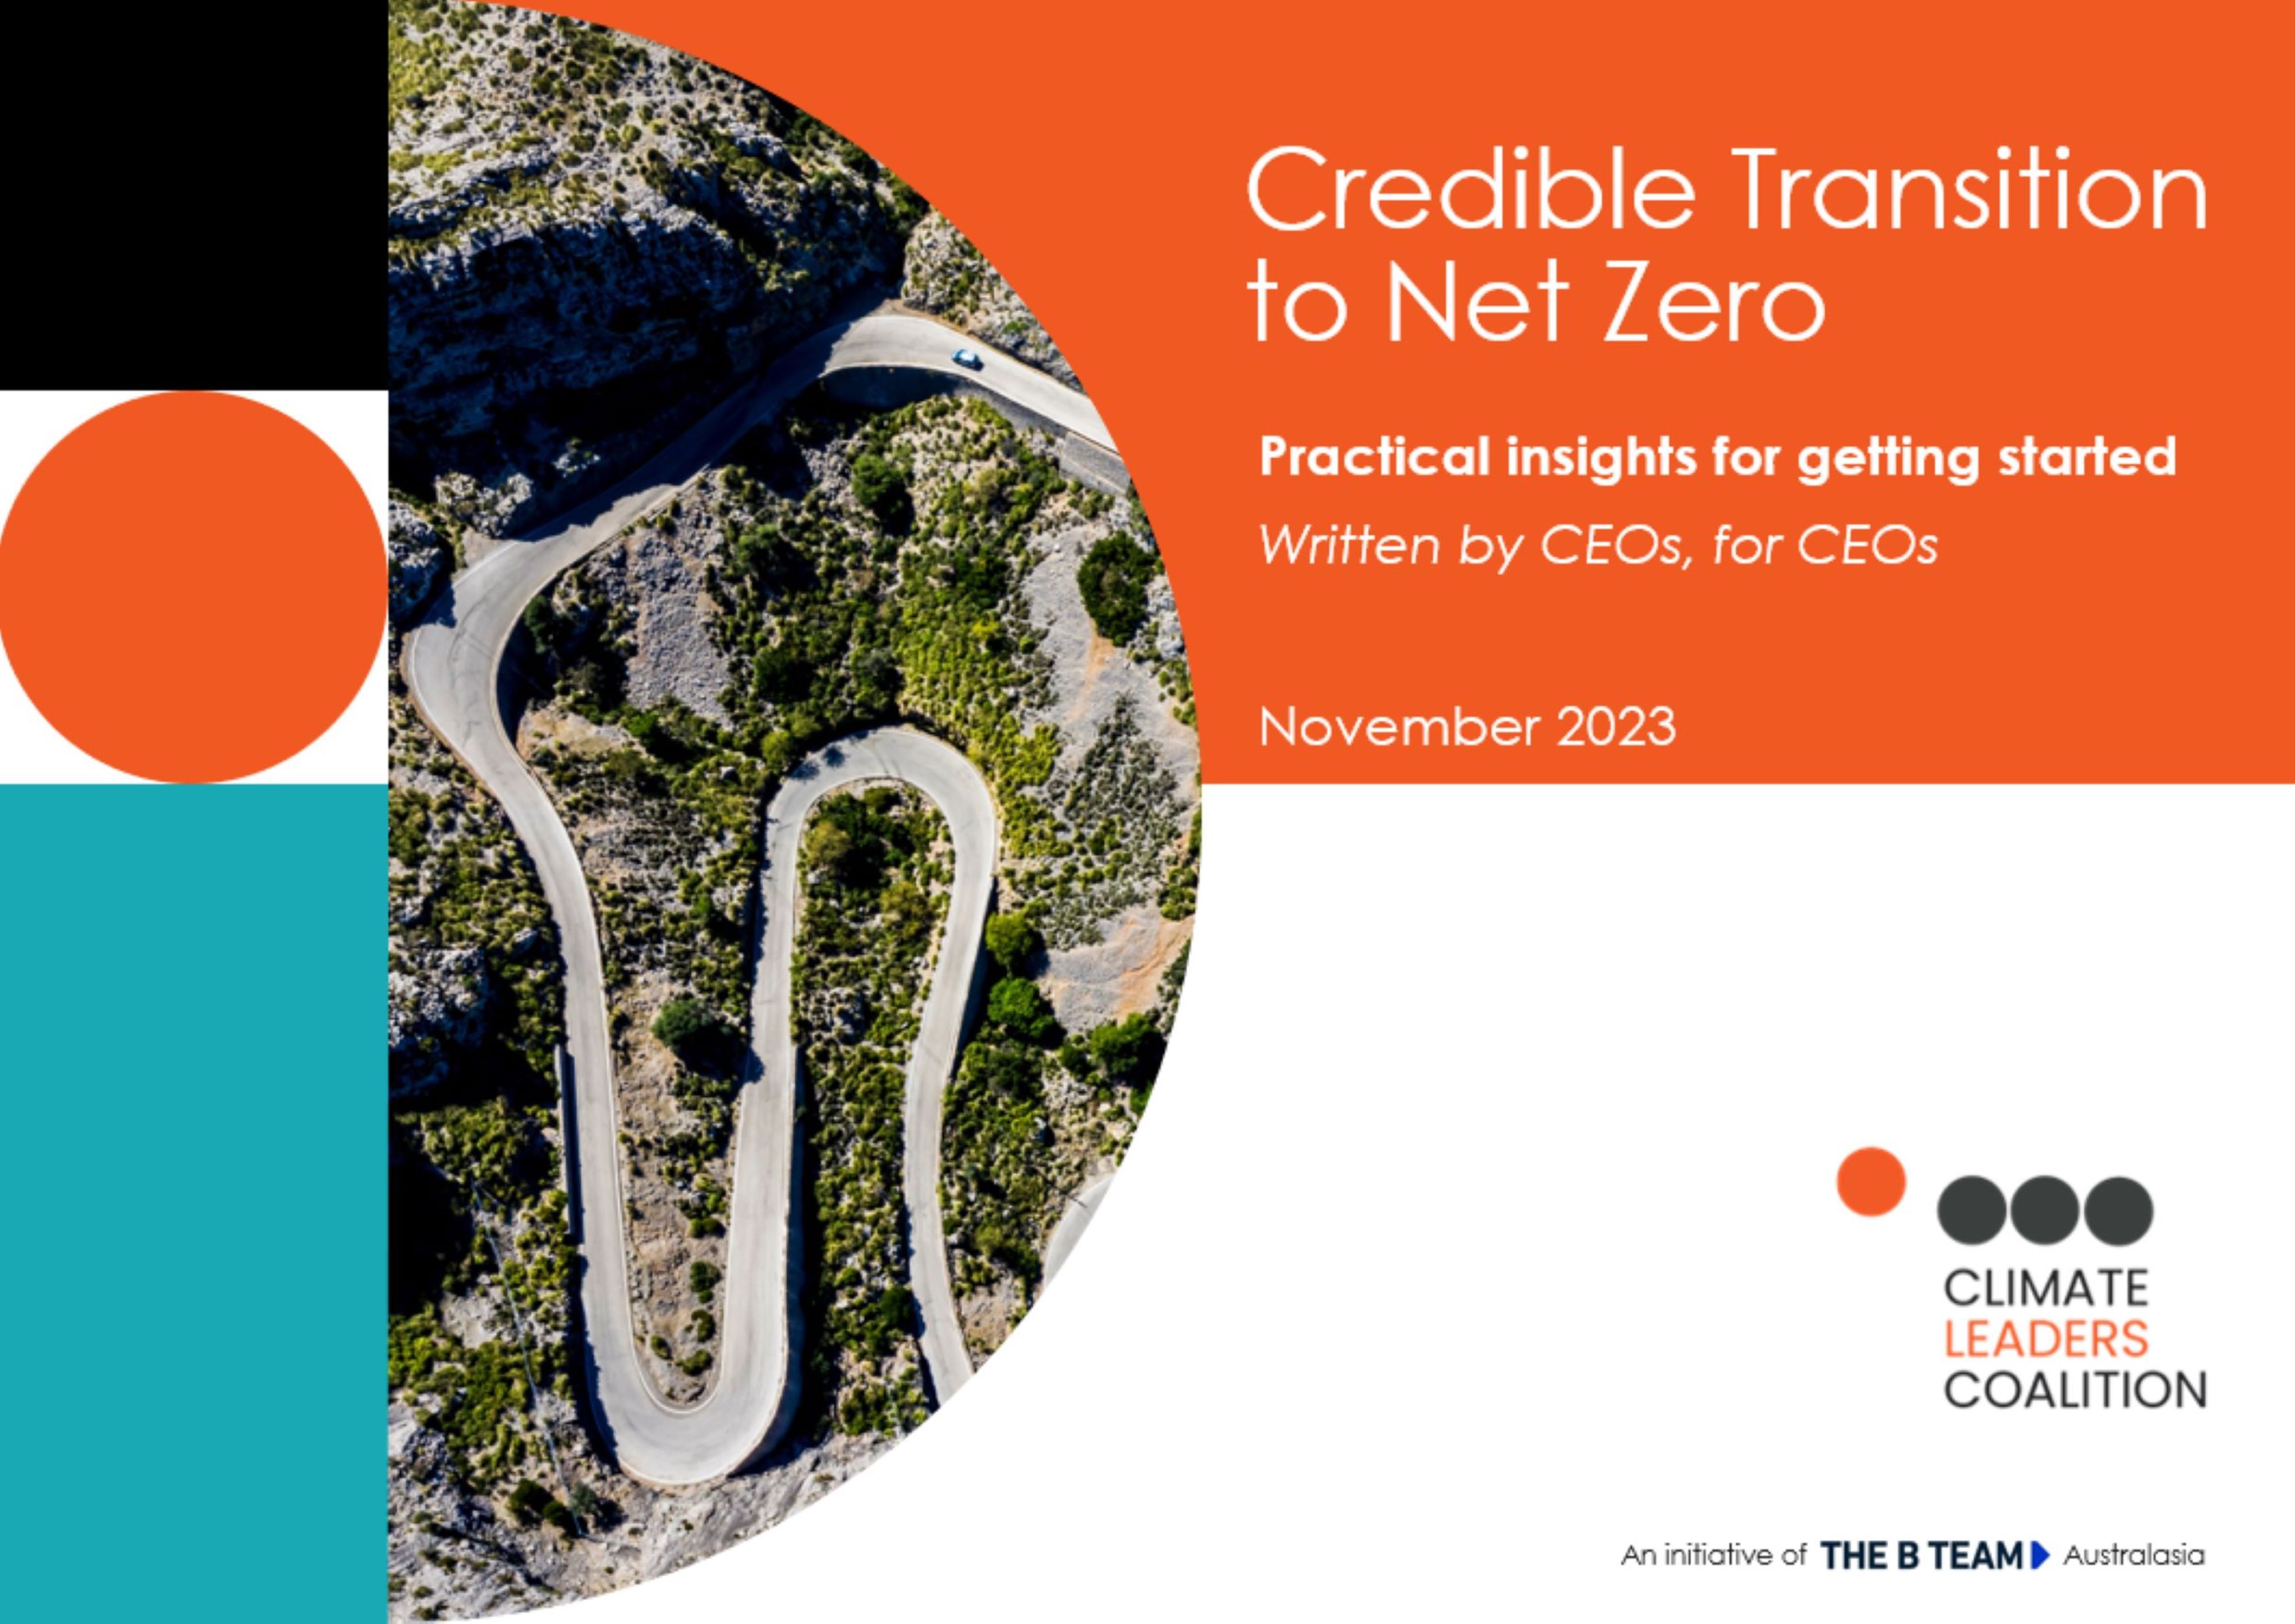 Credible Transition to Net Zero